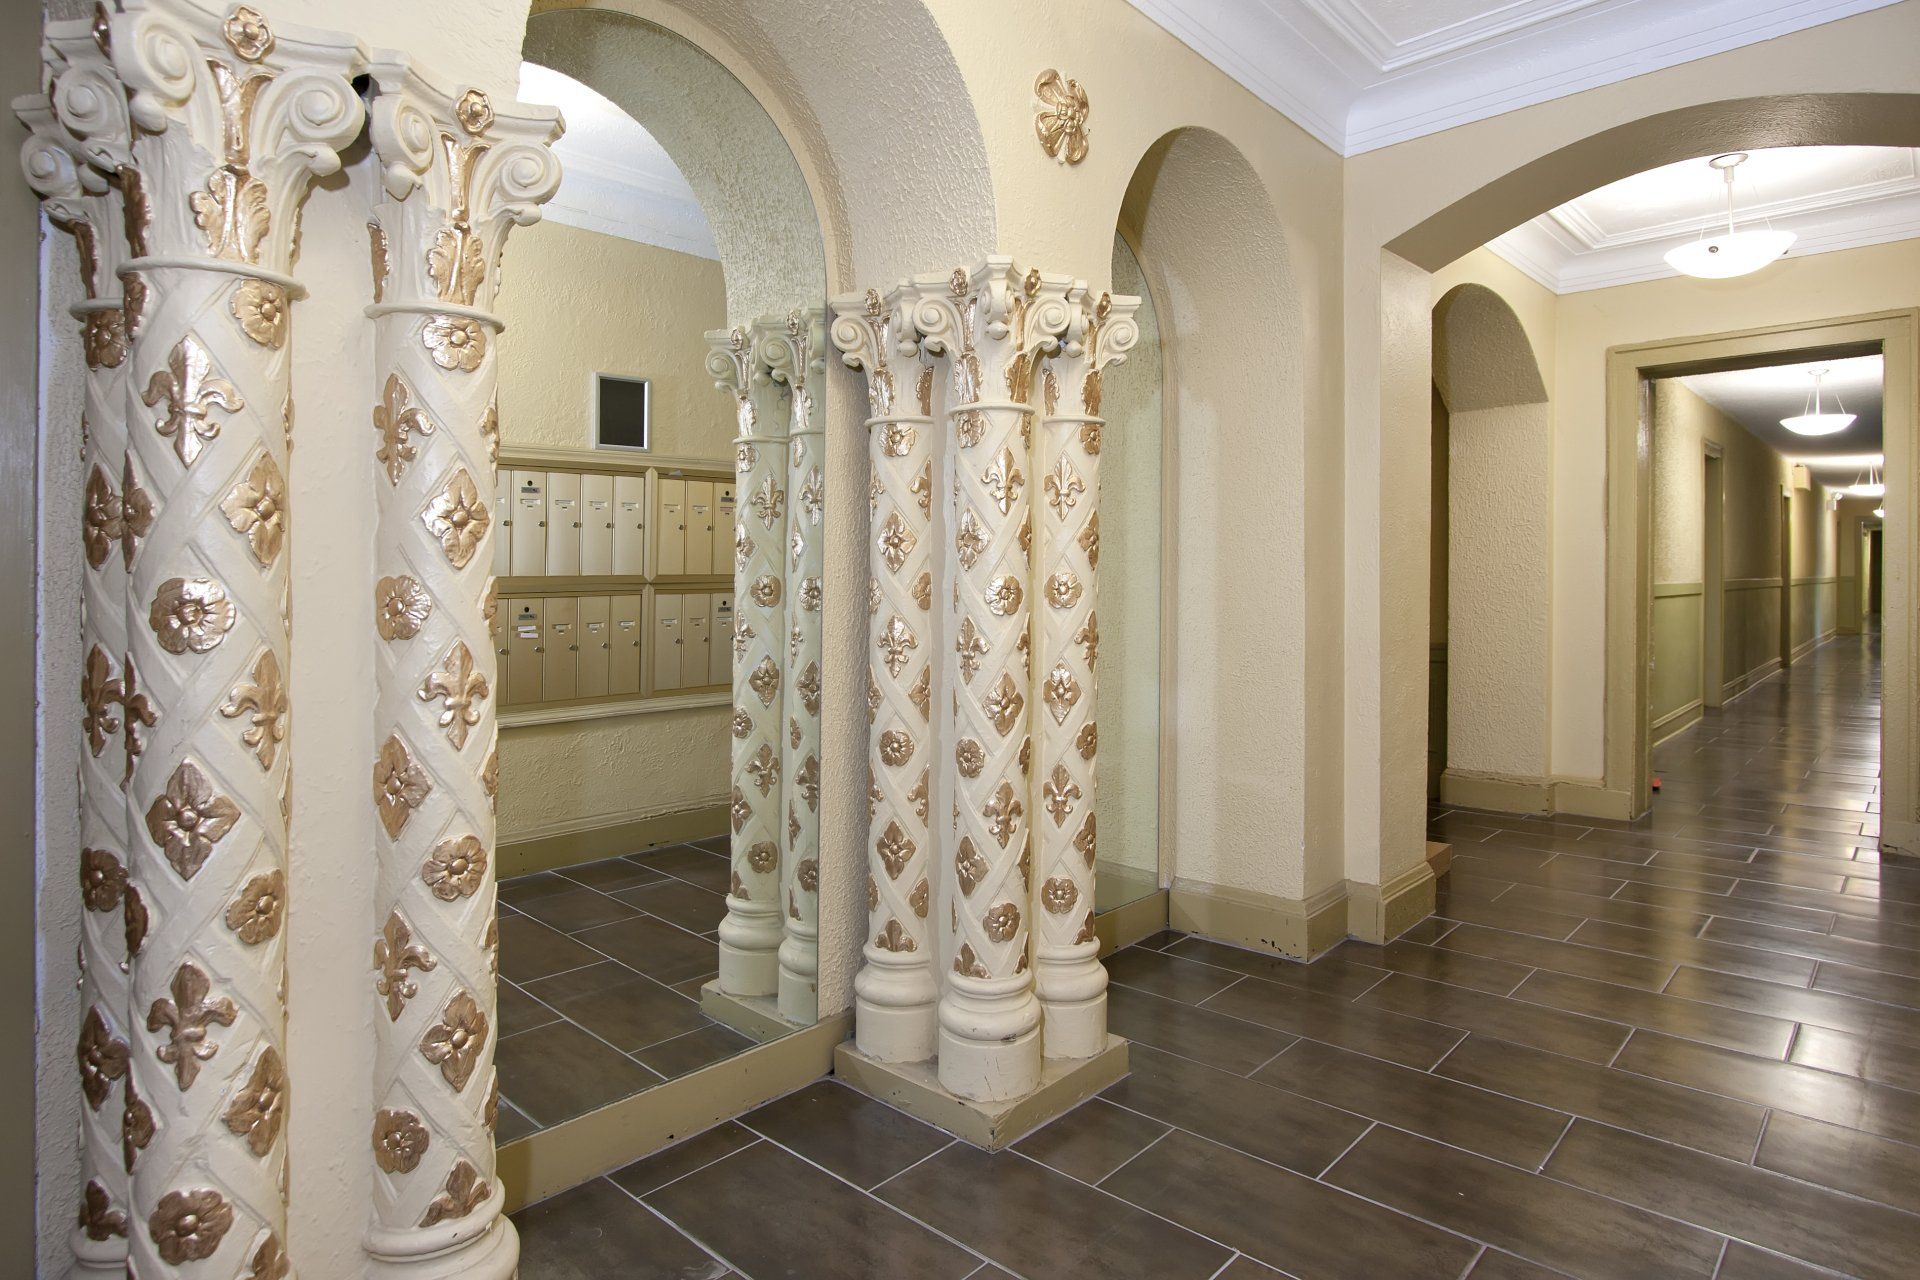 A hallway with columns and arches and a mirror